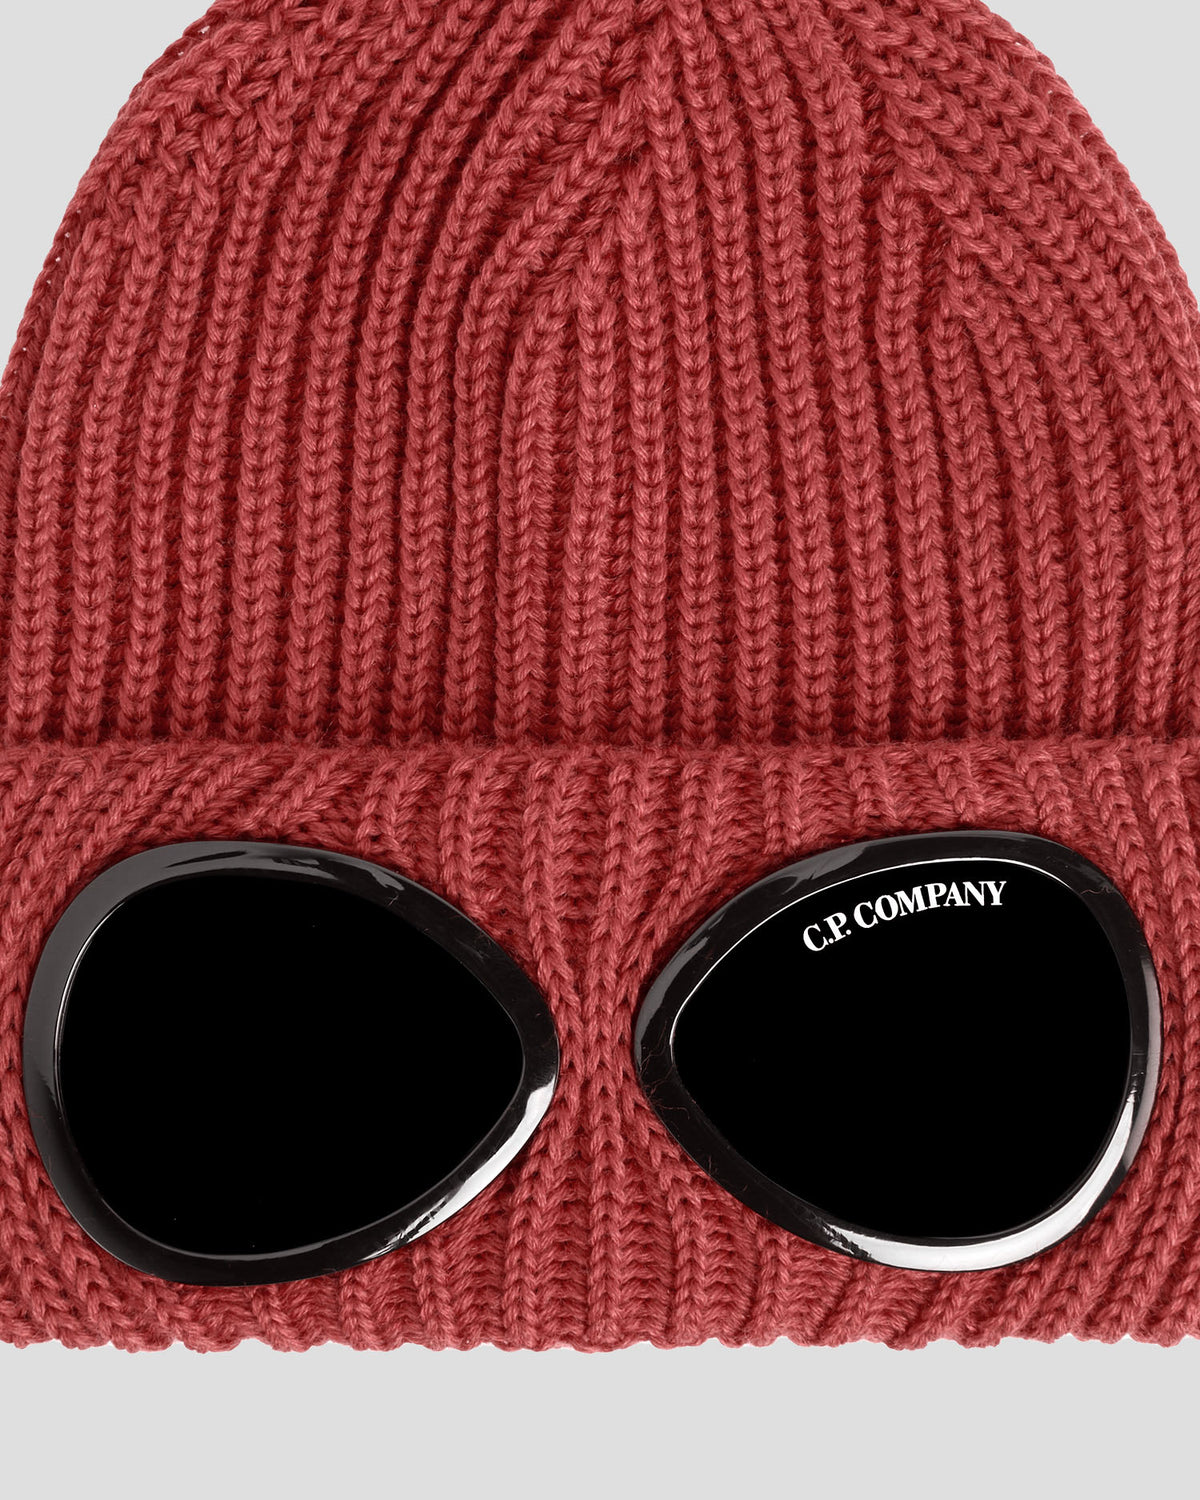 Extra Fine Merino Wool Goggle Beanie in Ketchup